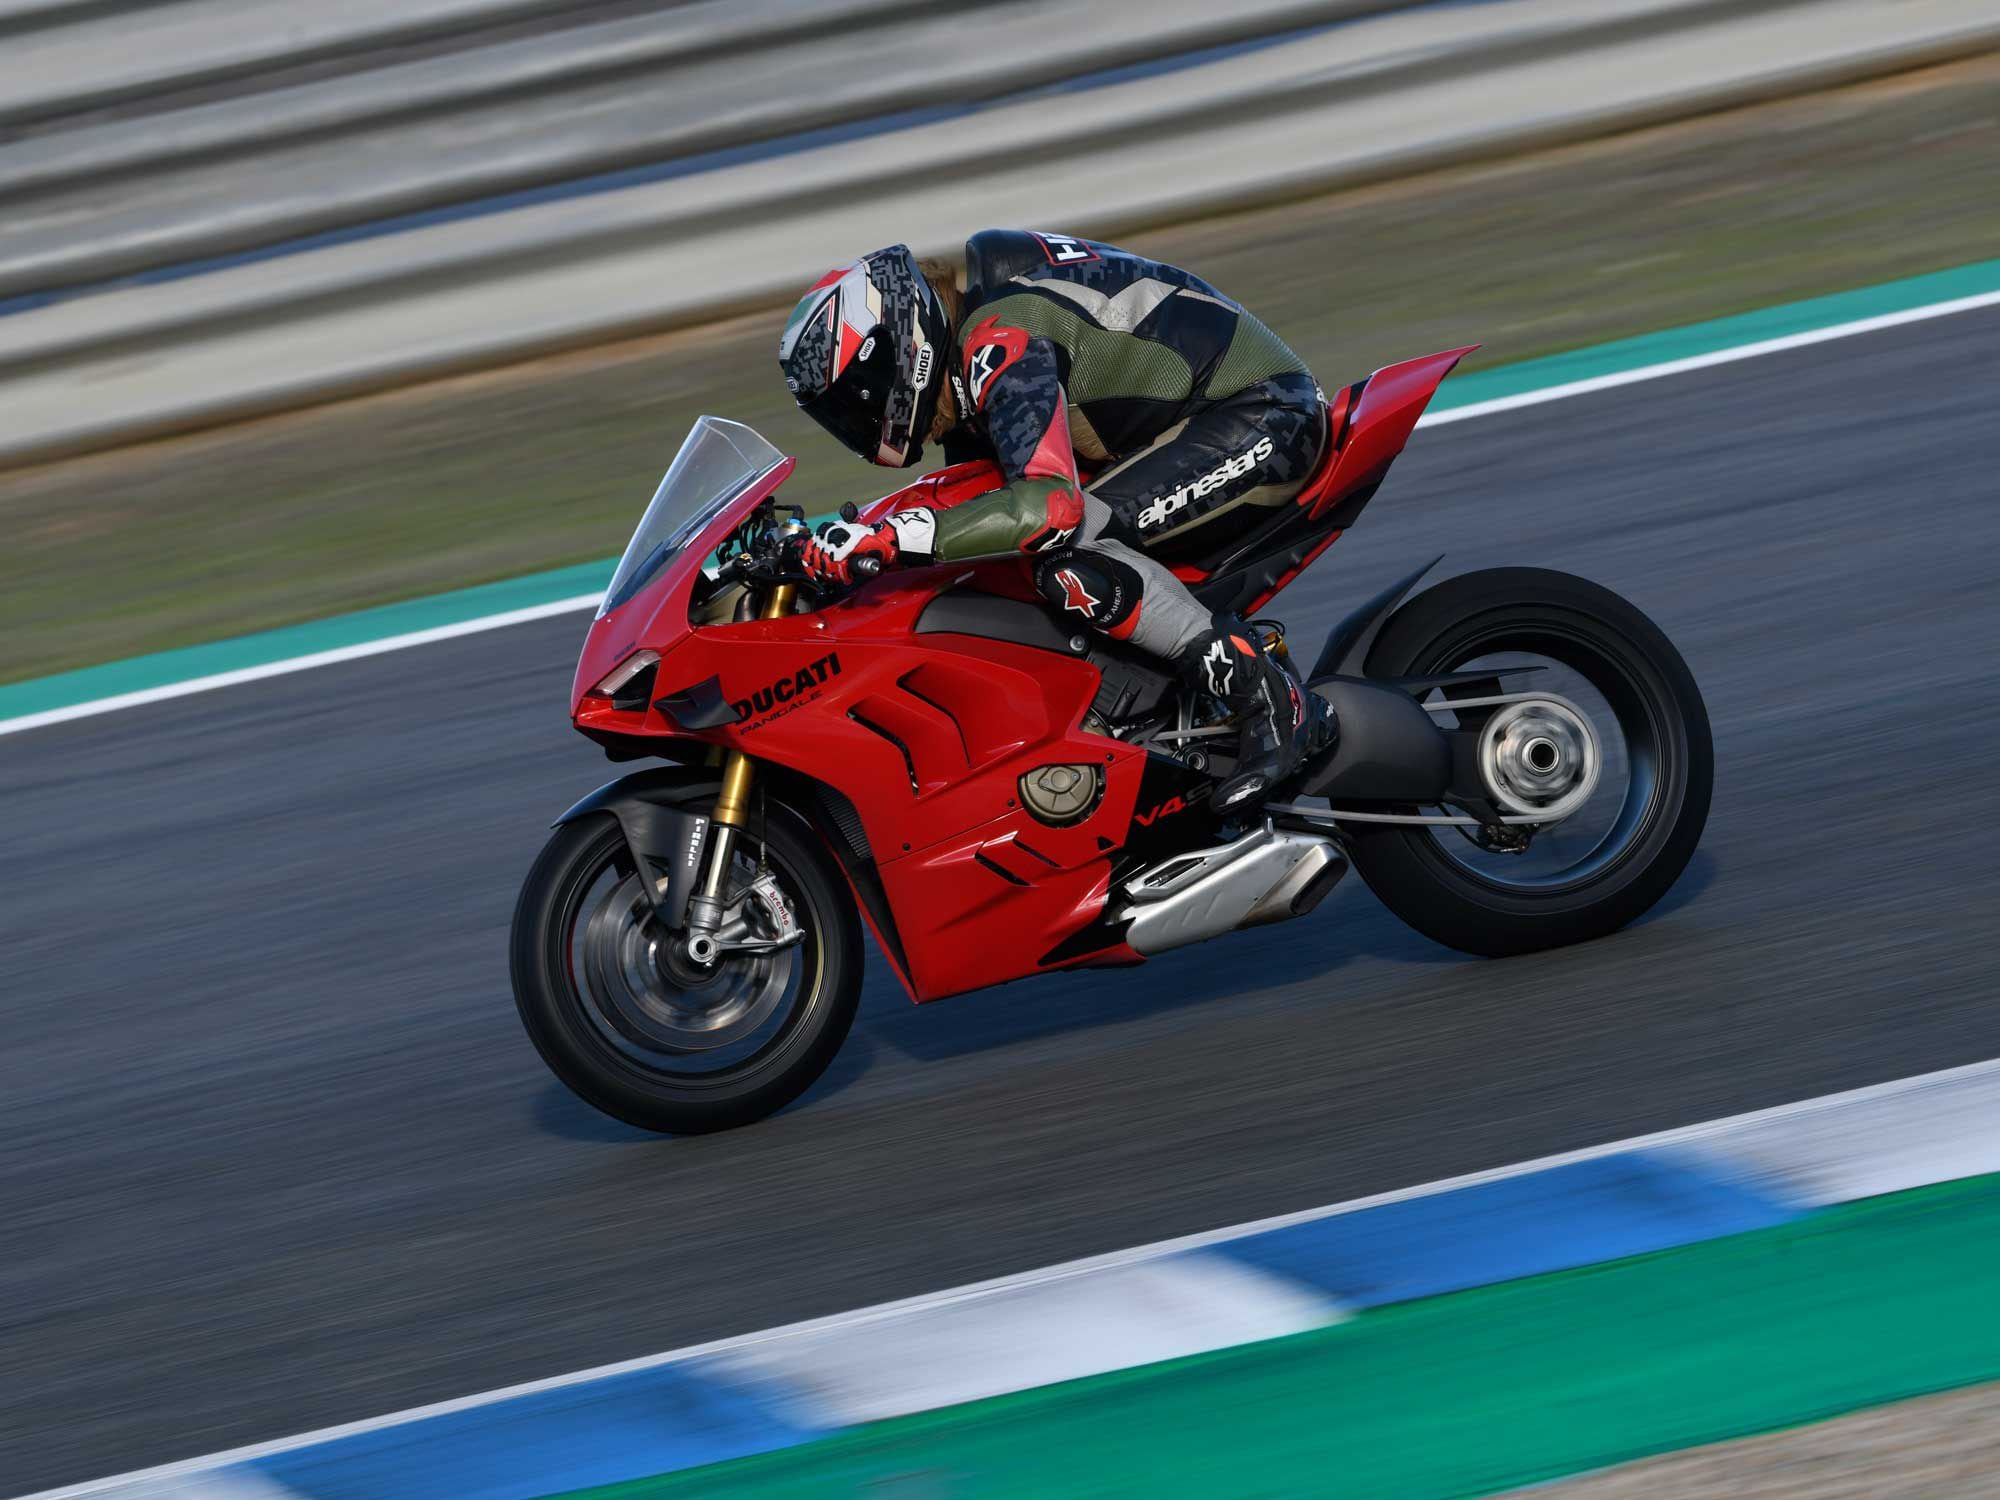 Ducati’s 1,103cc V-Four is easily one of our favorite modern superbike engine’s. It offers plenty of character with a wide, hard-hitting powerband.